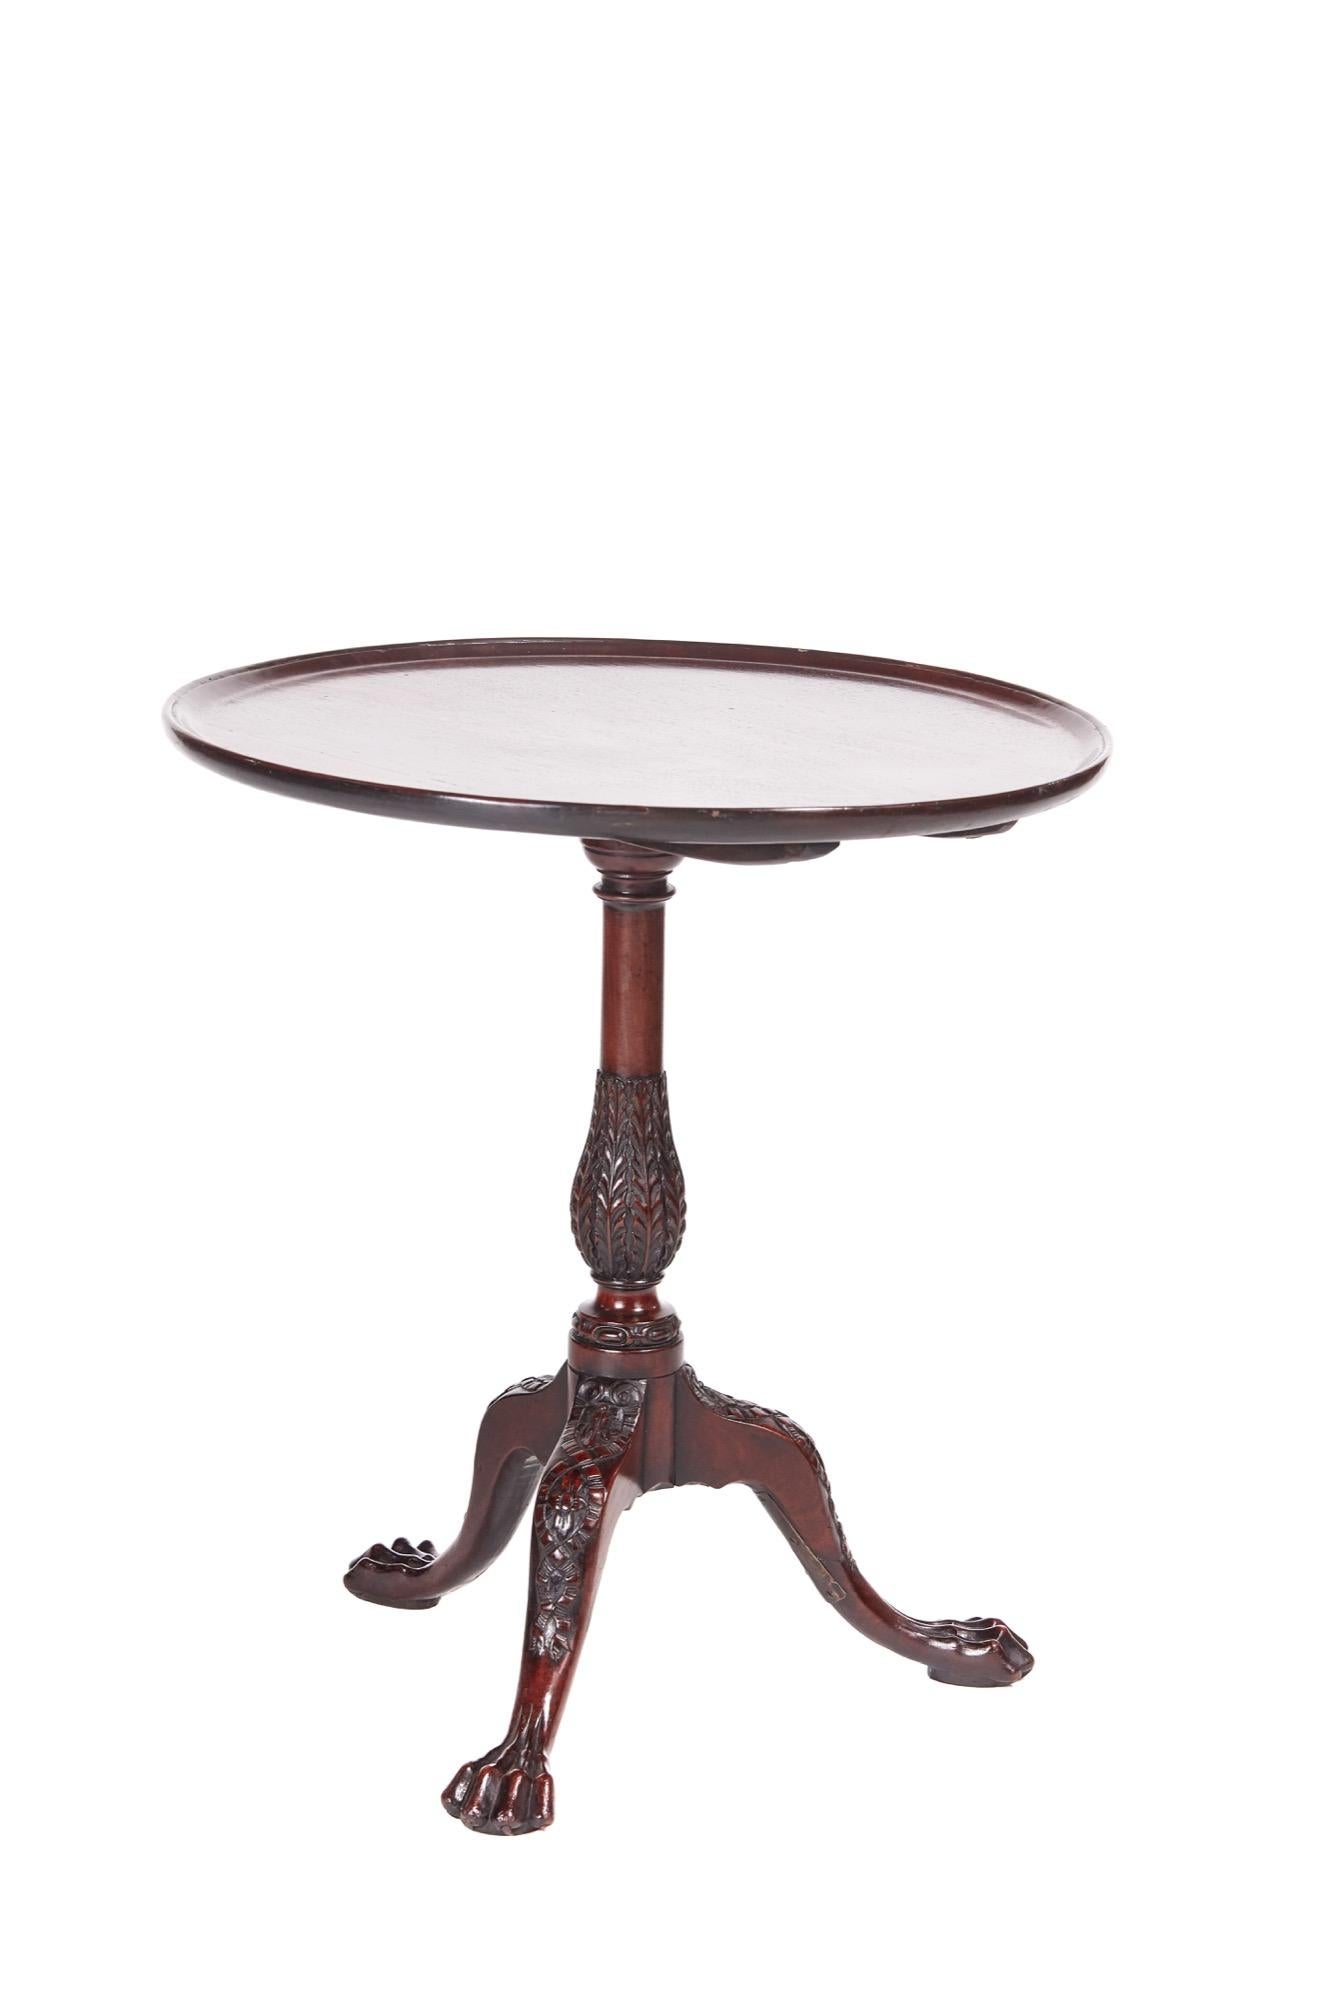 18th century antique carved mahogany dish top tripod table having a splendid mahogany dish tilt-top table supported on a fantastic carved turned bulbous column standing on three elegant carved cabriole legs with claw feet.

Lovely color and